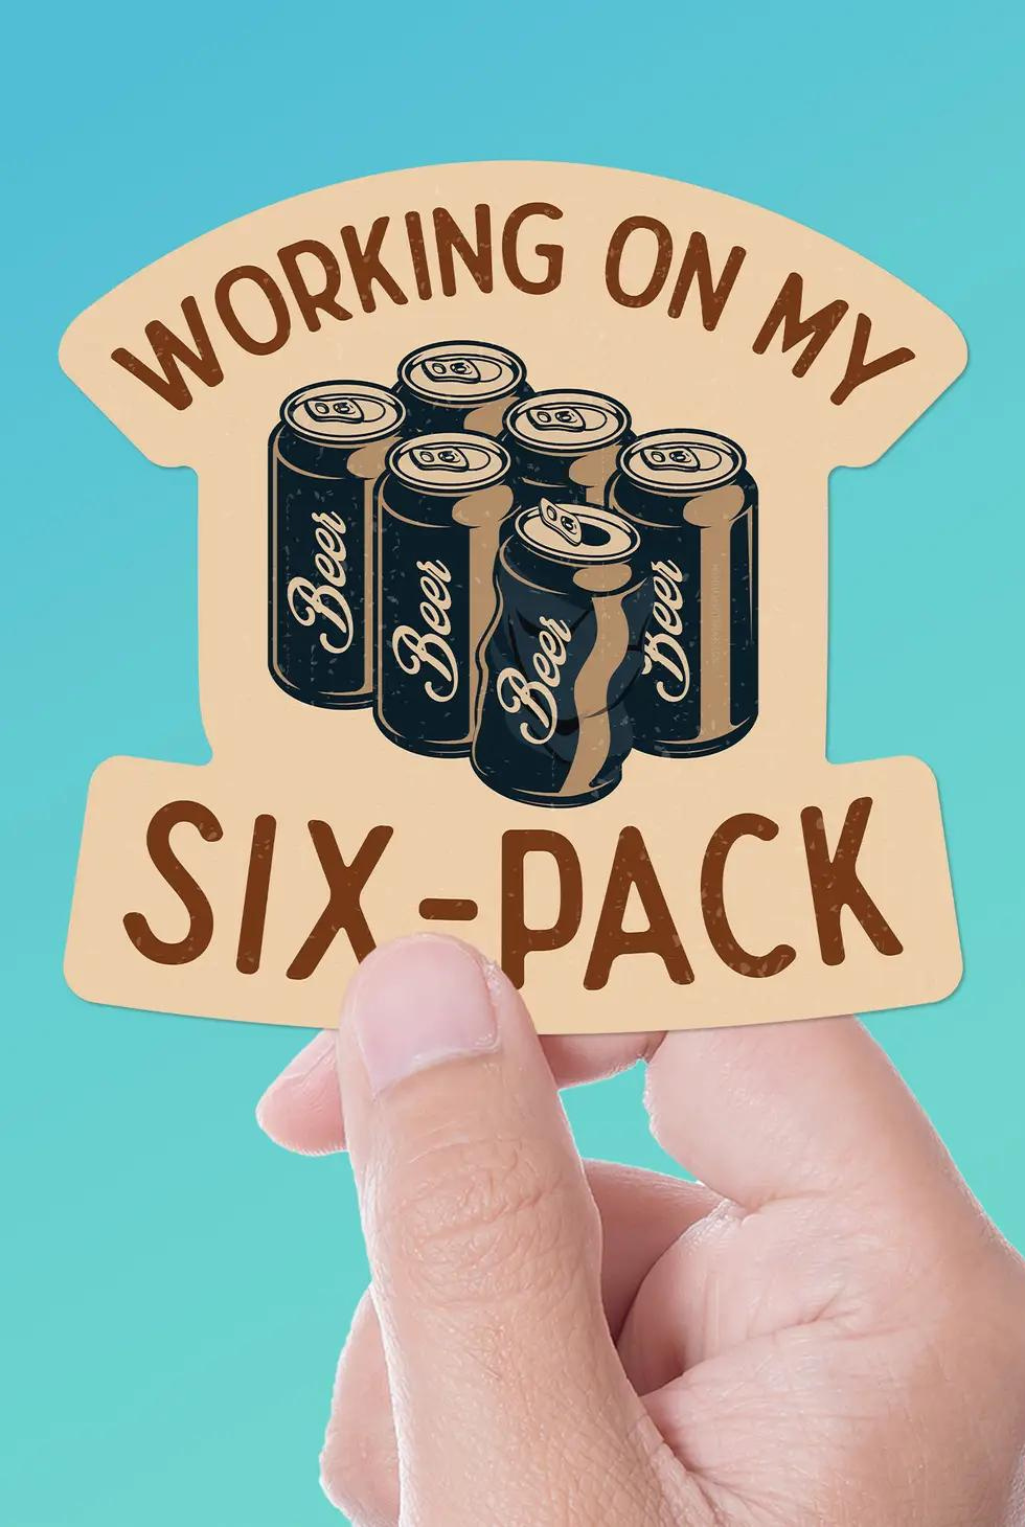 Working On Six Pack Sticker